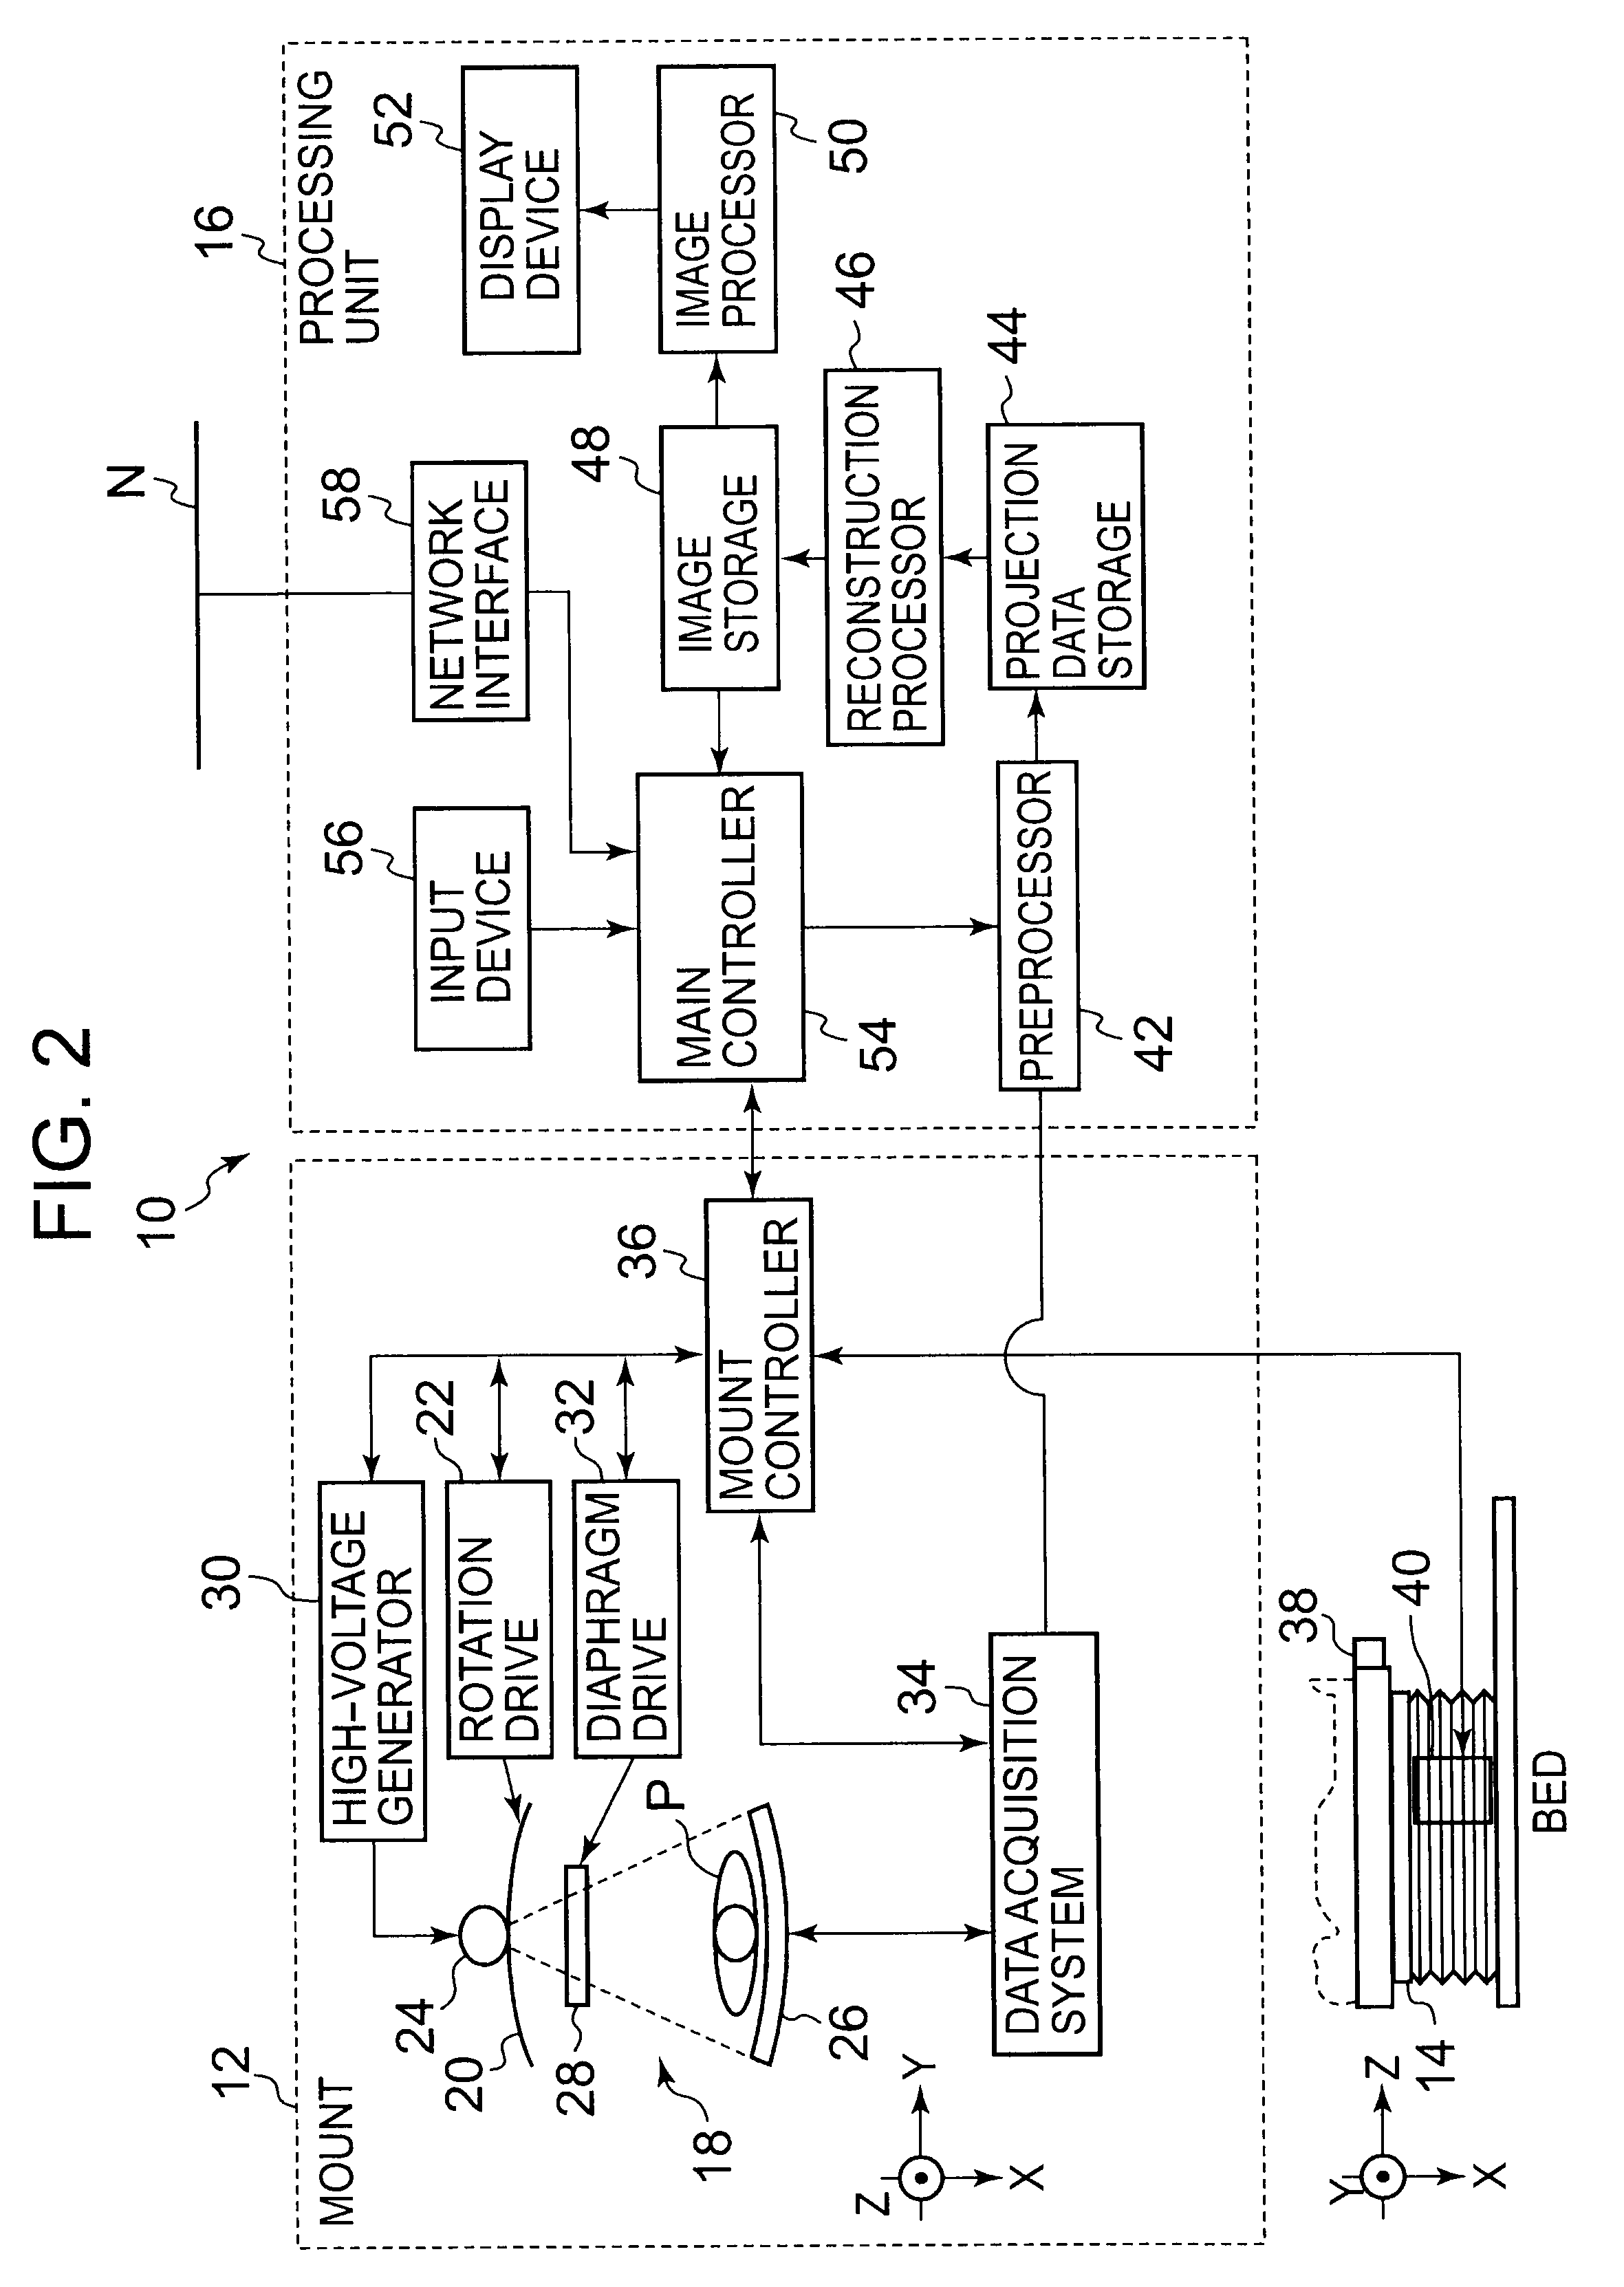 X-ray ct system and a method for creating a scanning plan